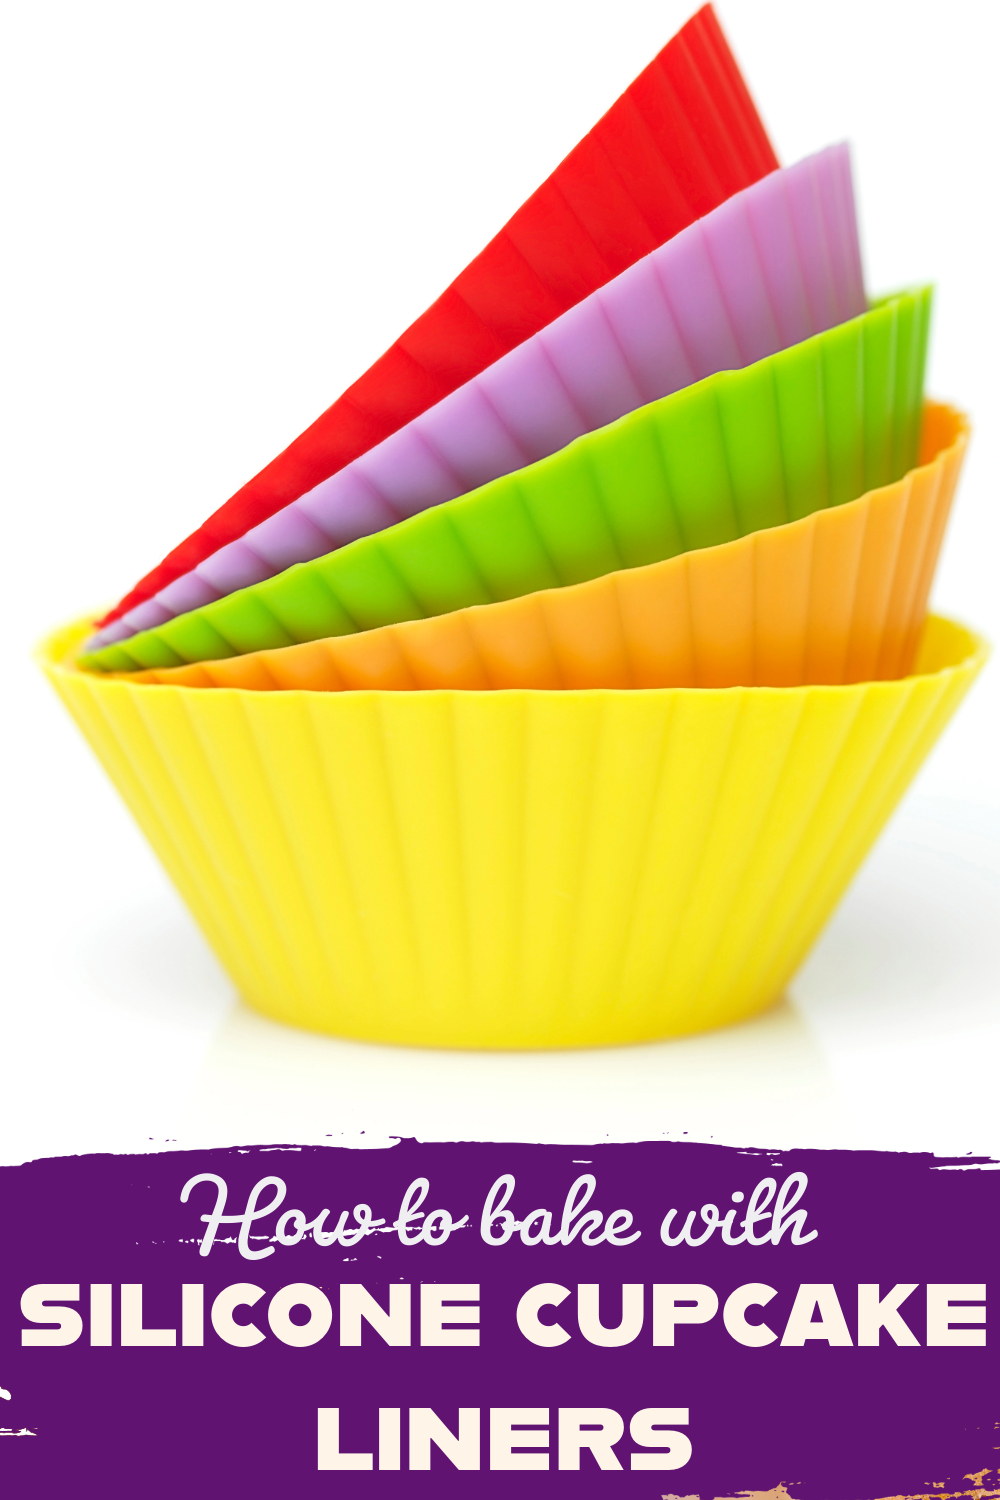 How to bake with silicone cupcake liners